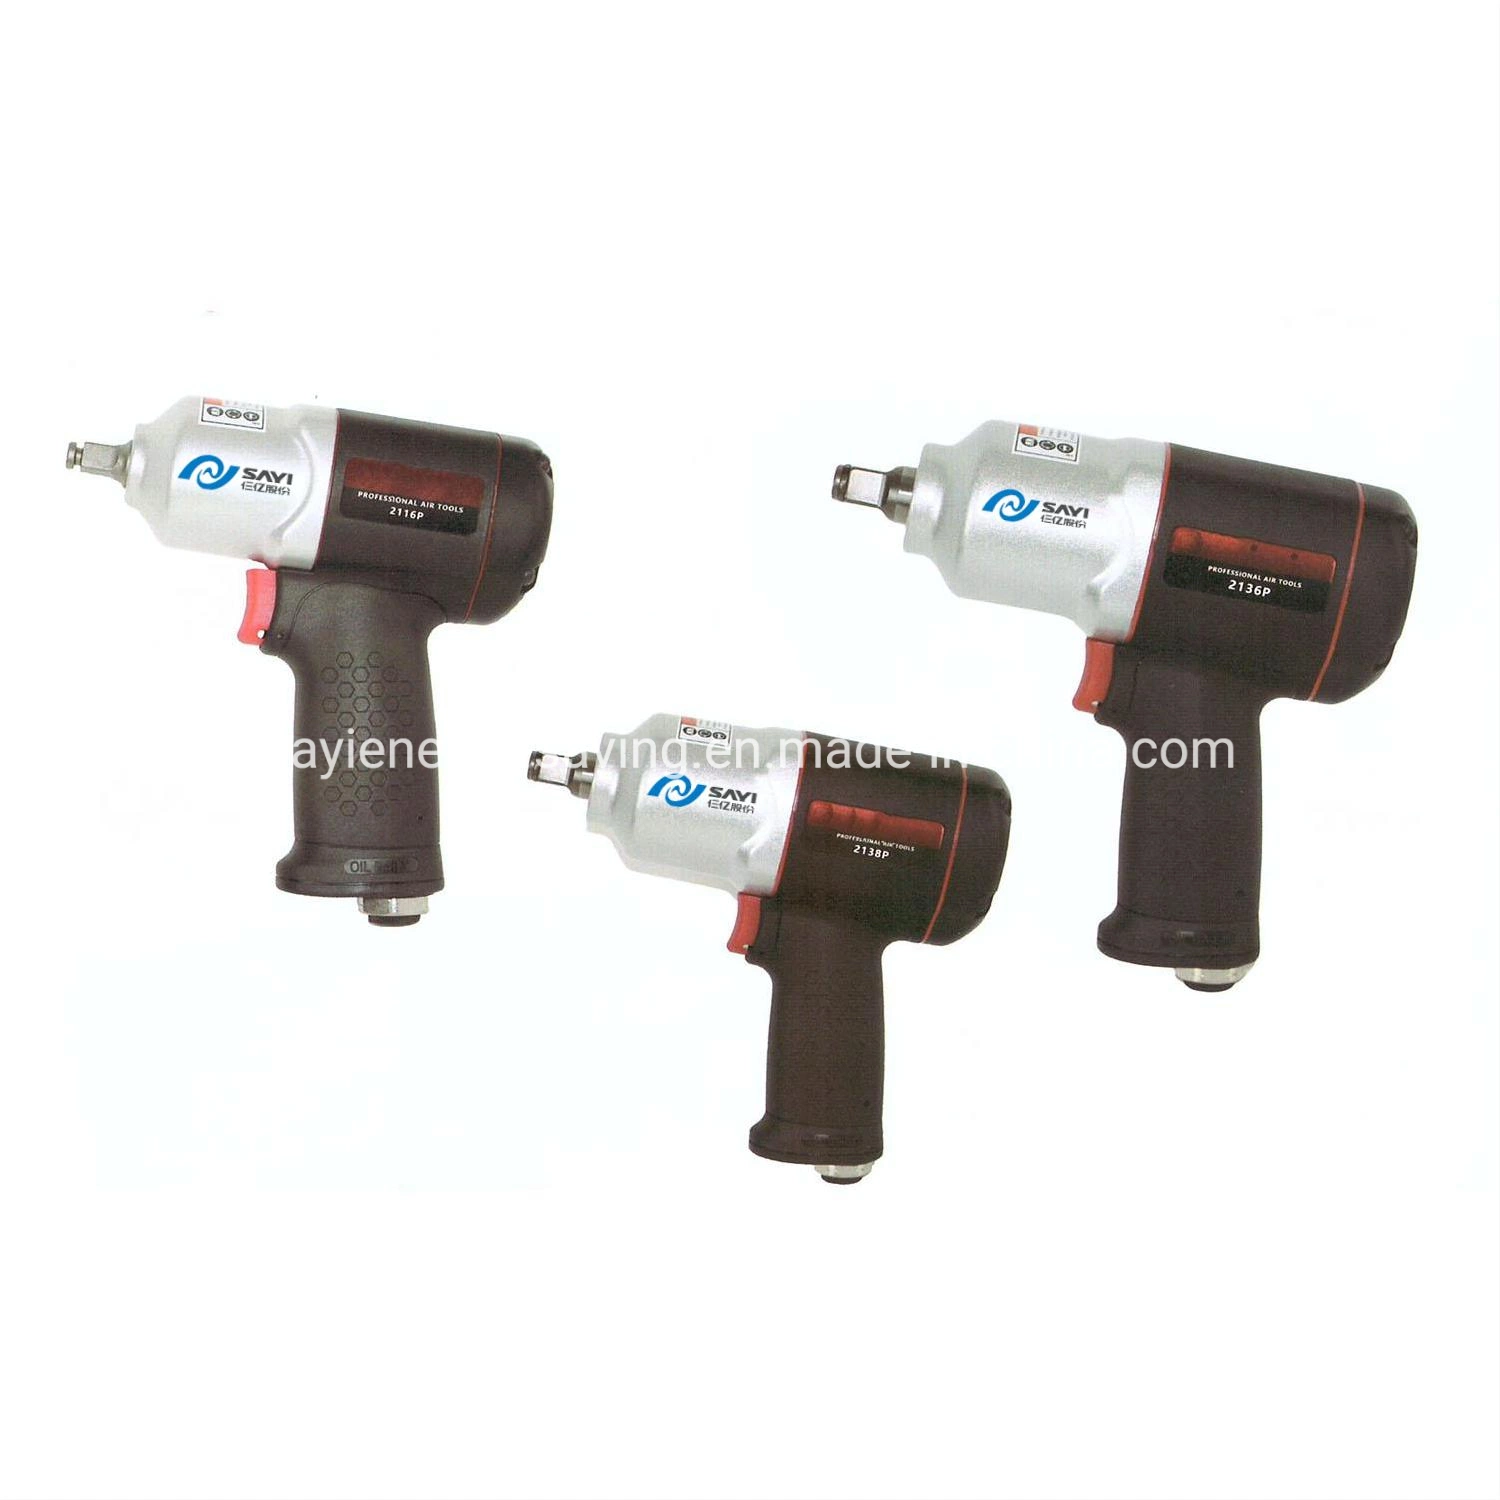 Air Tool Pneumatic Portable Power Handtool Hardware Air Impact Wrench Sy-2116p Sy-2136p Sy-2138p Tools Power Tools Powerful Reliable Durable